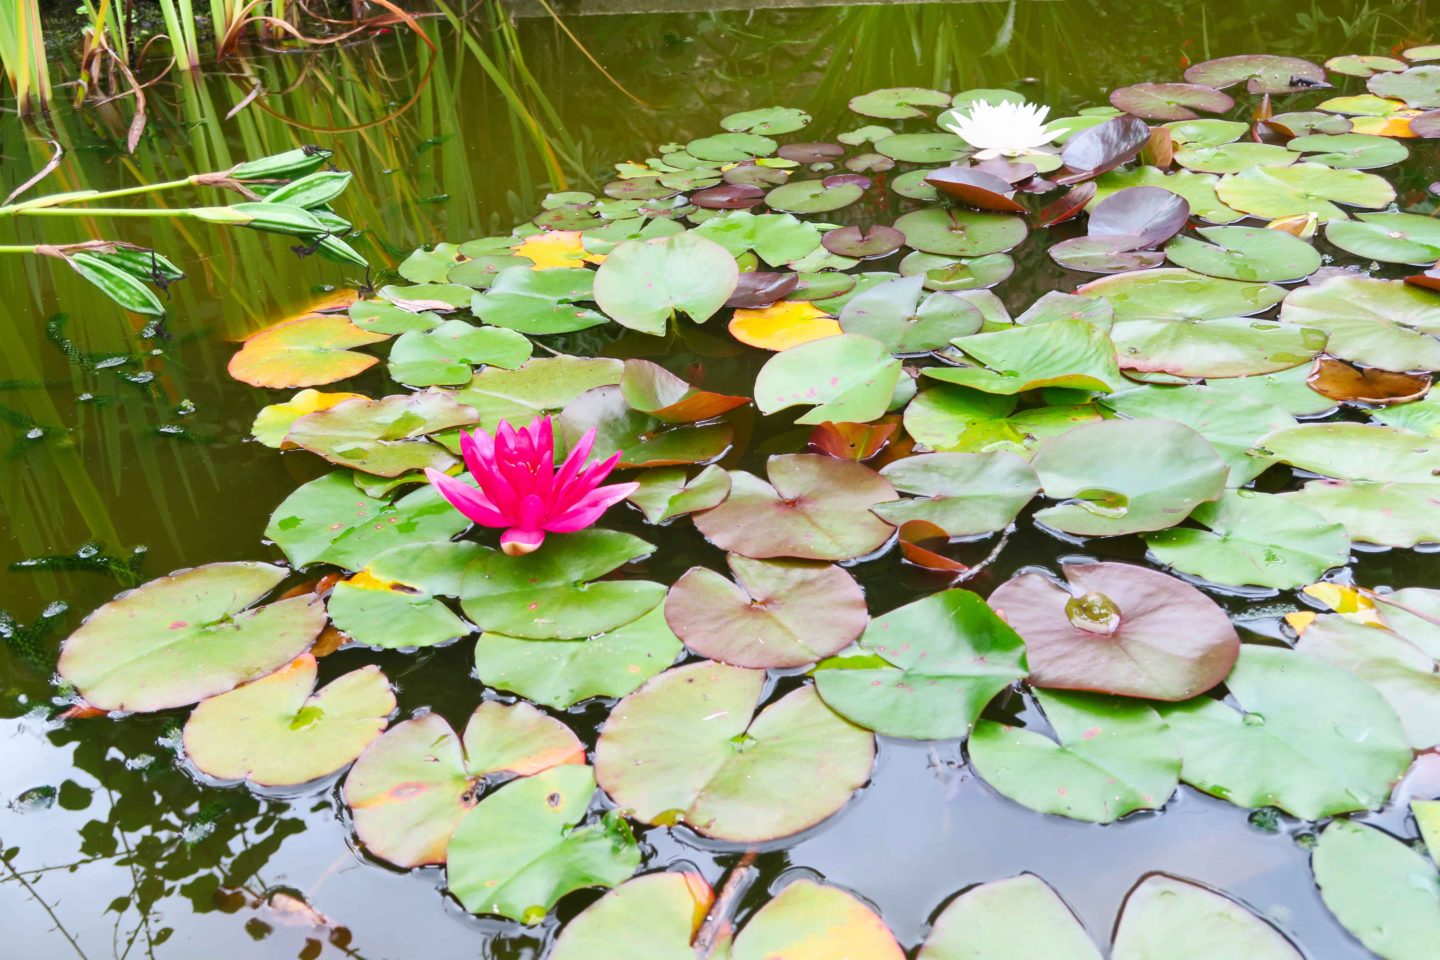 water lillies with pink and white flower in a pond at the lost gardens of heligan in cornwall